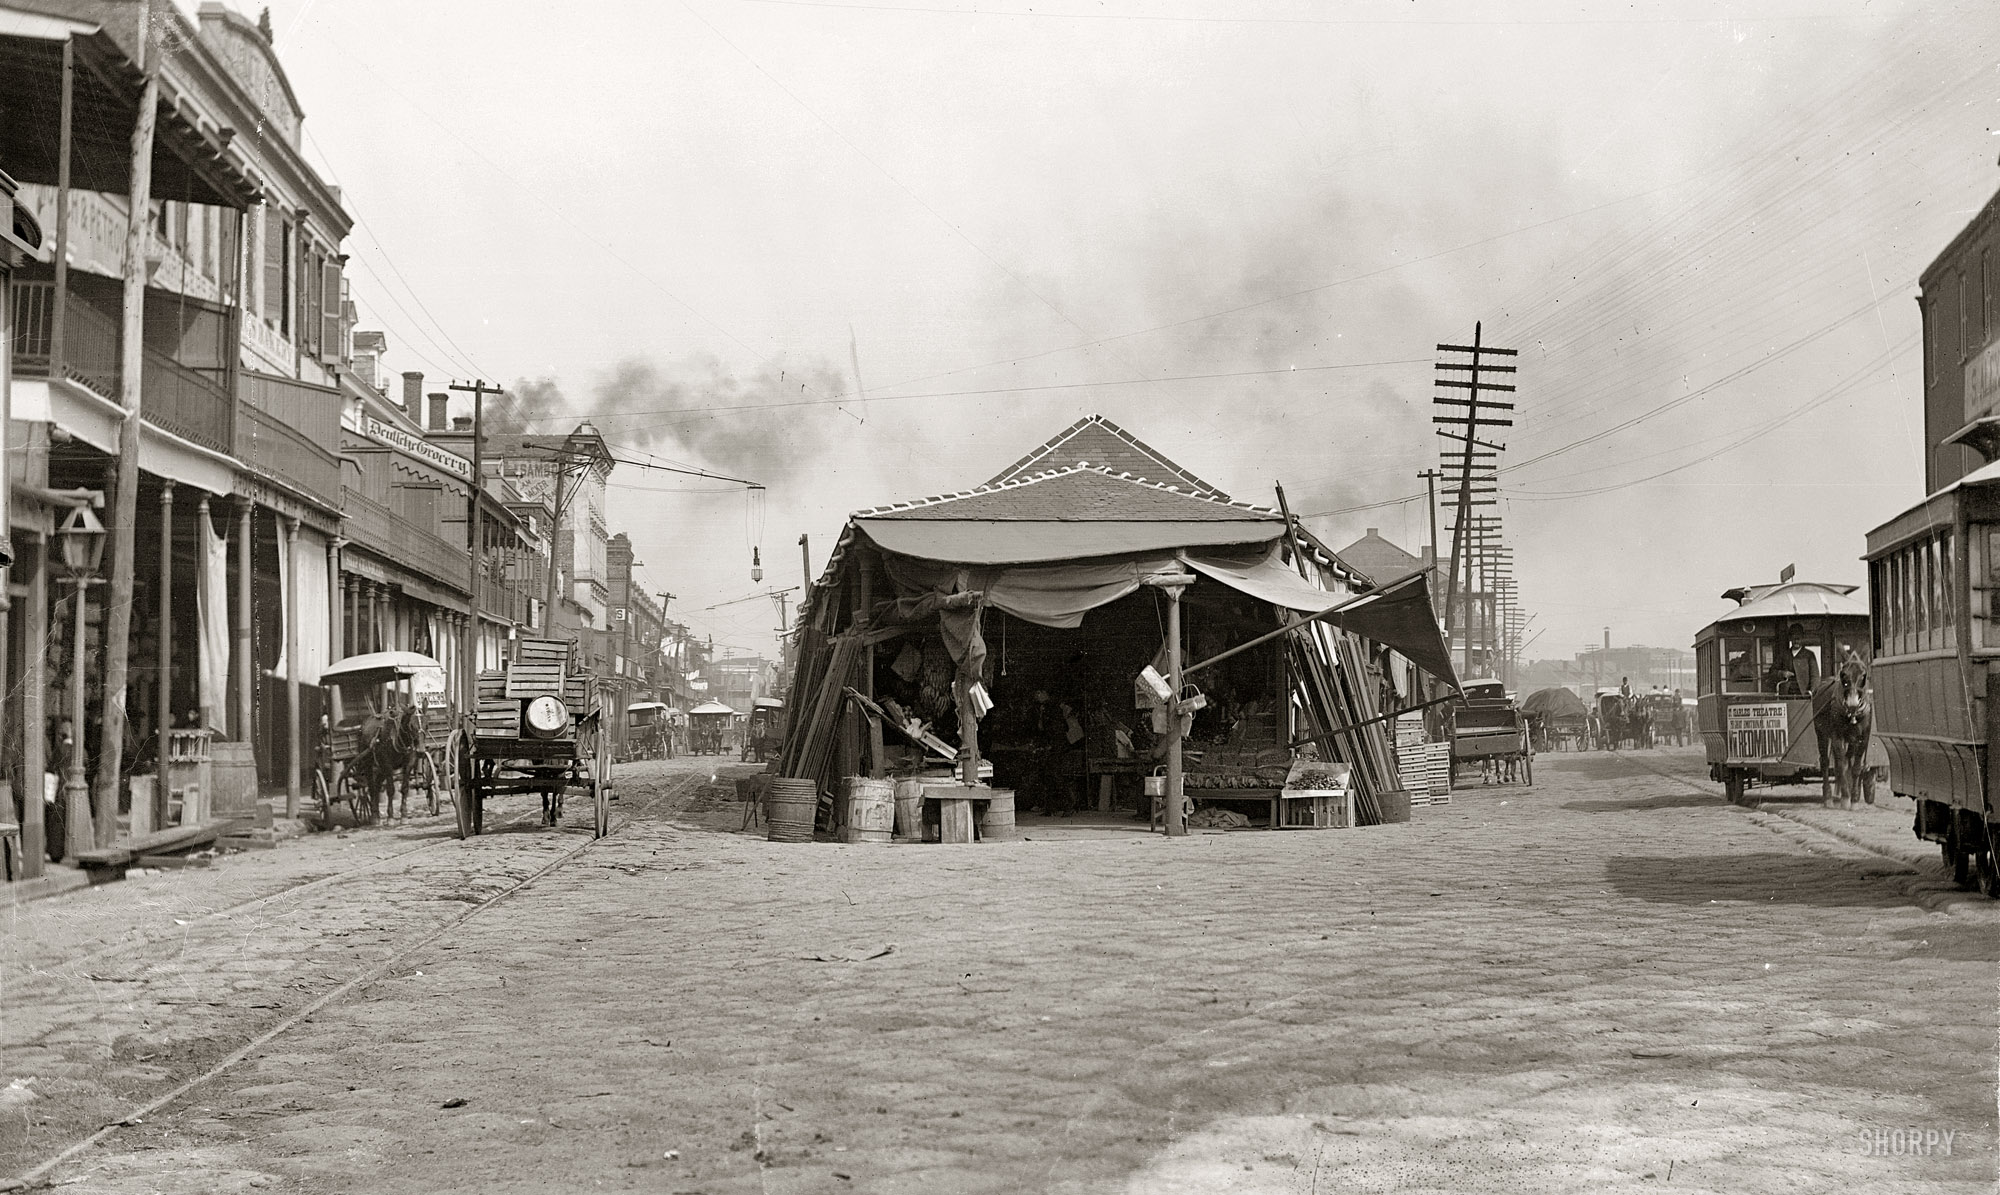 Circa 1880s-1890s. "The old French Market, New Orleans." Photo by William Henry Jackson. Detroit Publishing Co. glass negative. View full size.